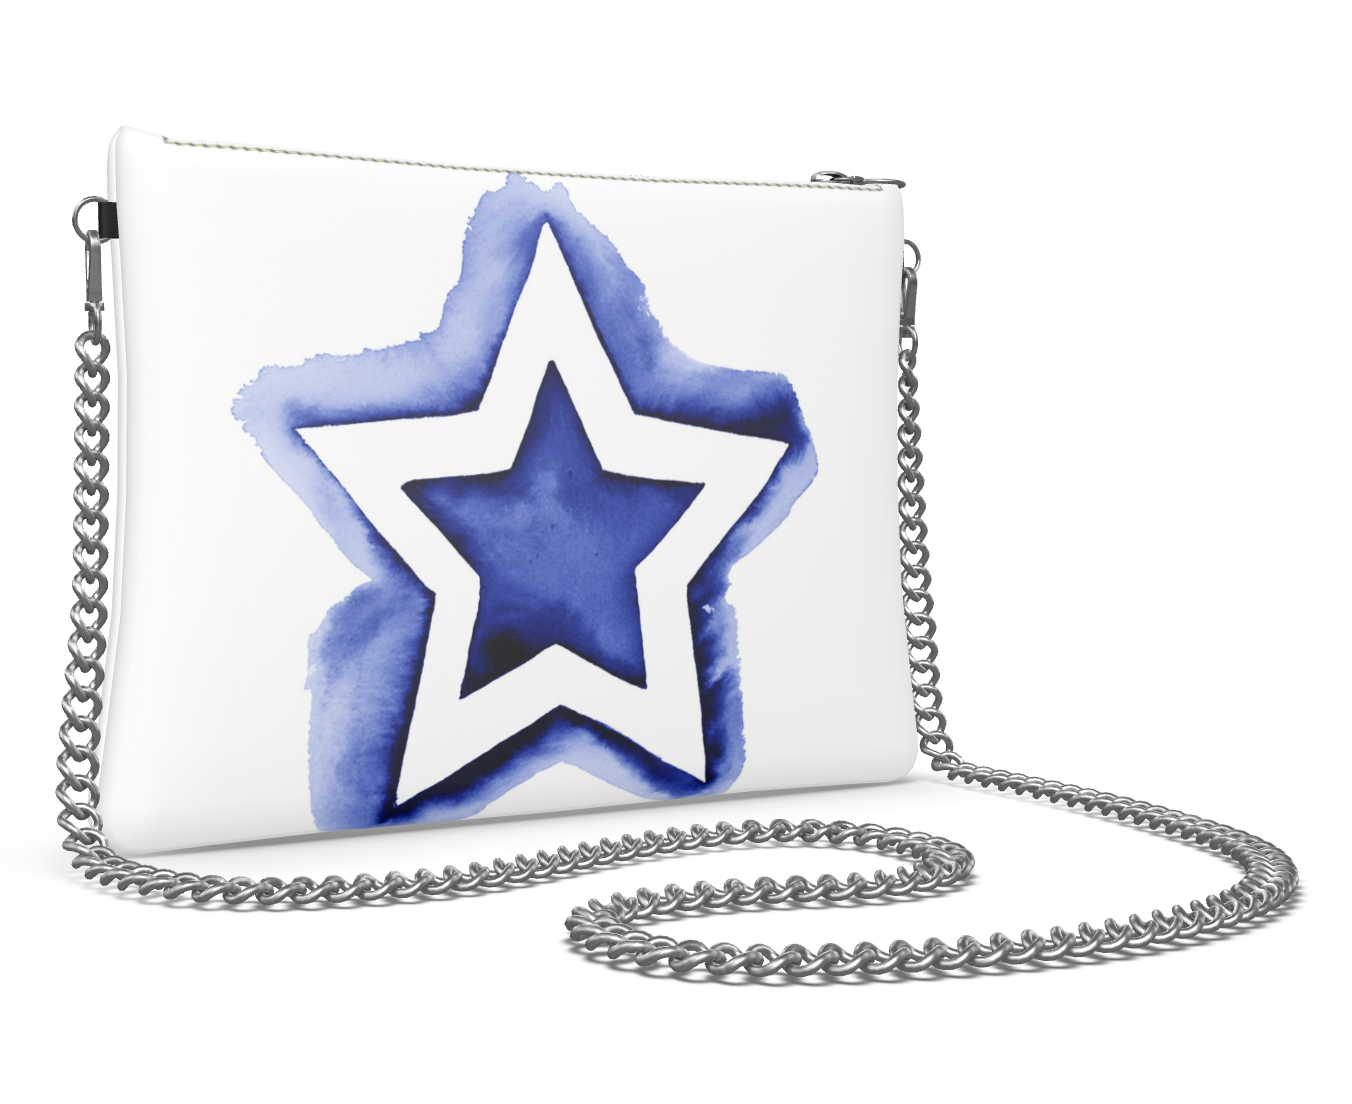 UNTITLED BOUTIQUE White and Blue Leather Star Crossbody Bag with Silver Chain - Limited Edition